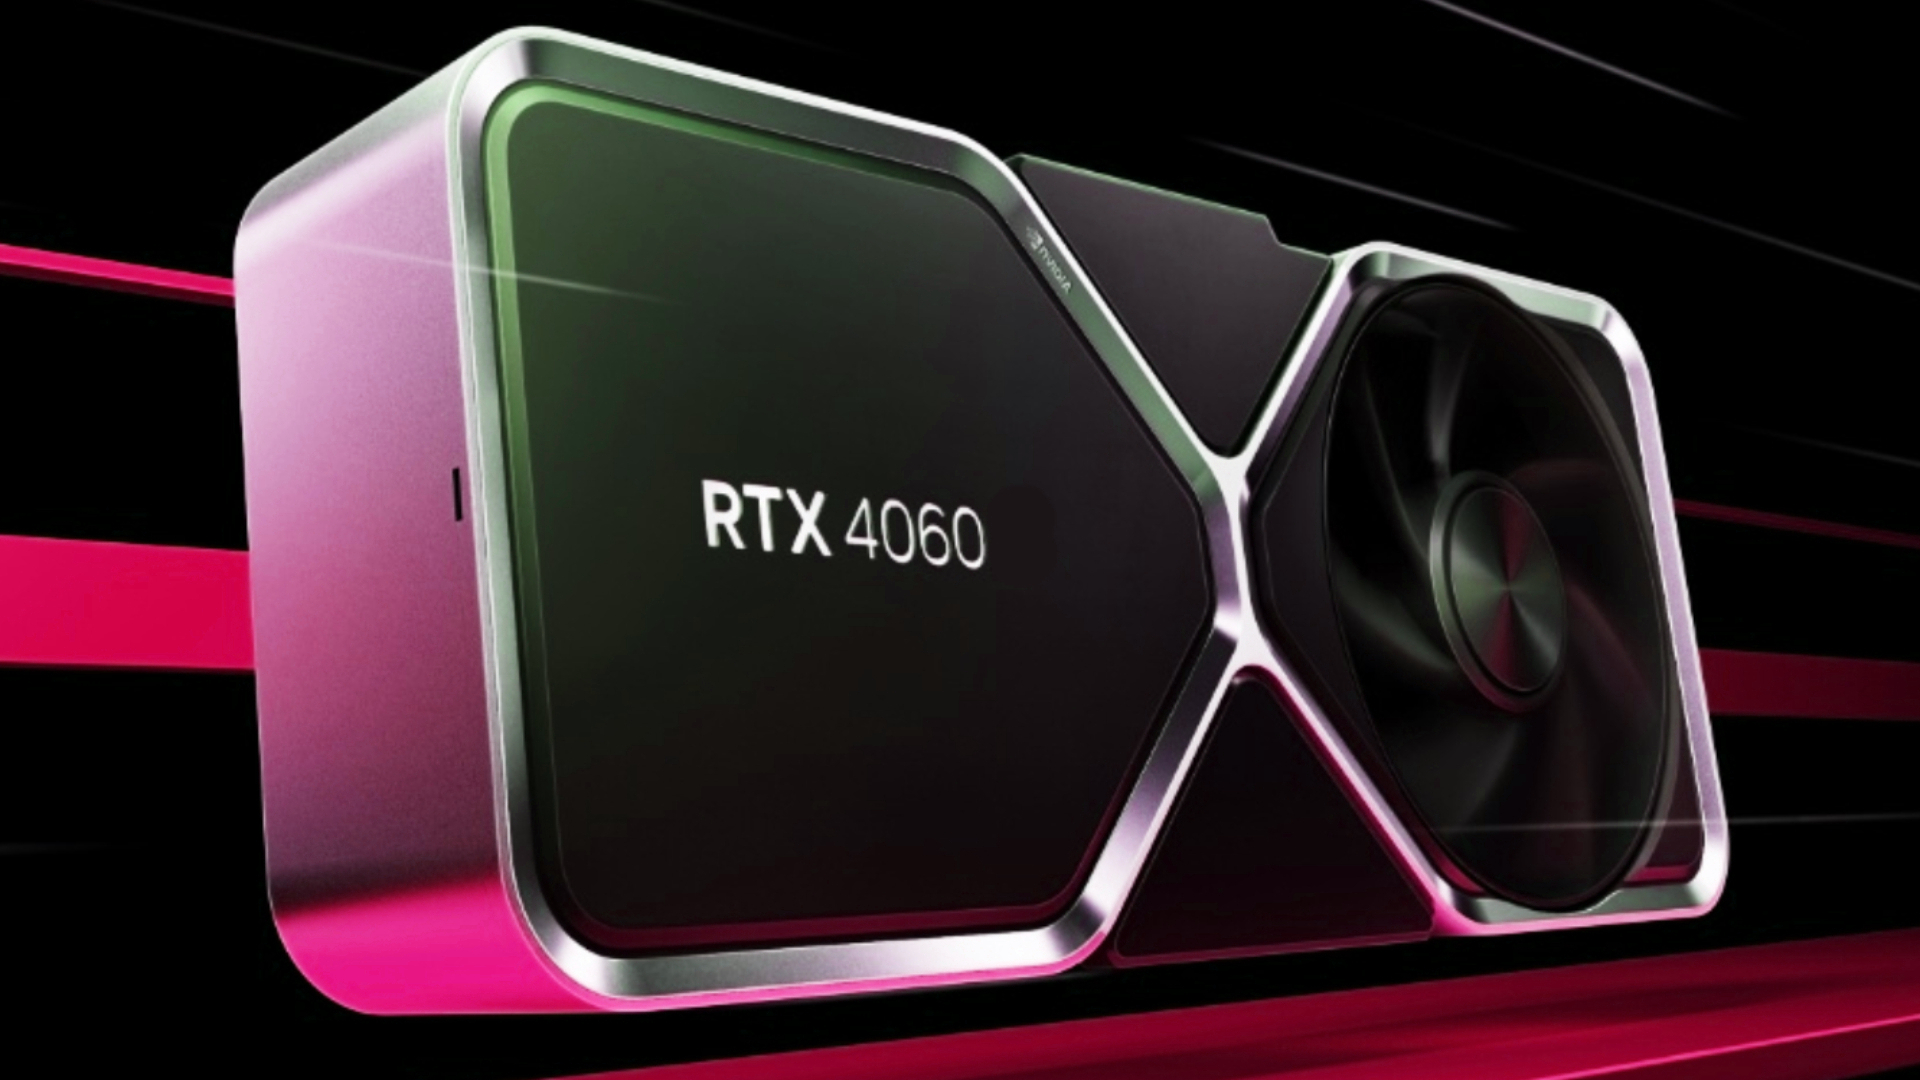 Nvidia claims its GeForce RTX 4060 can save you over 100 dollars